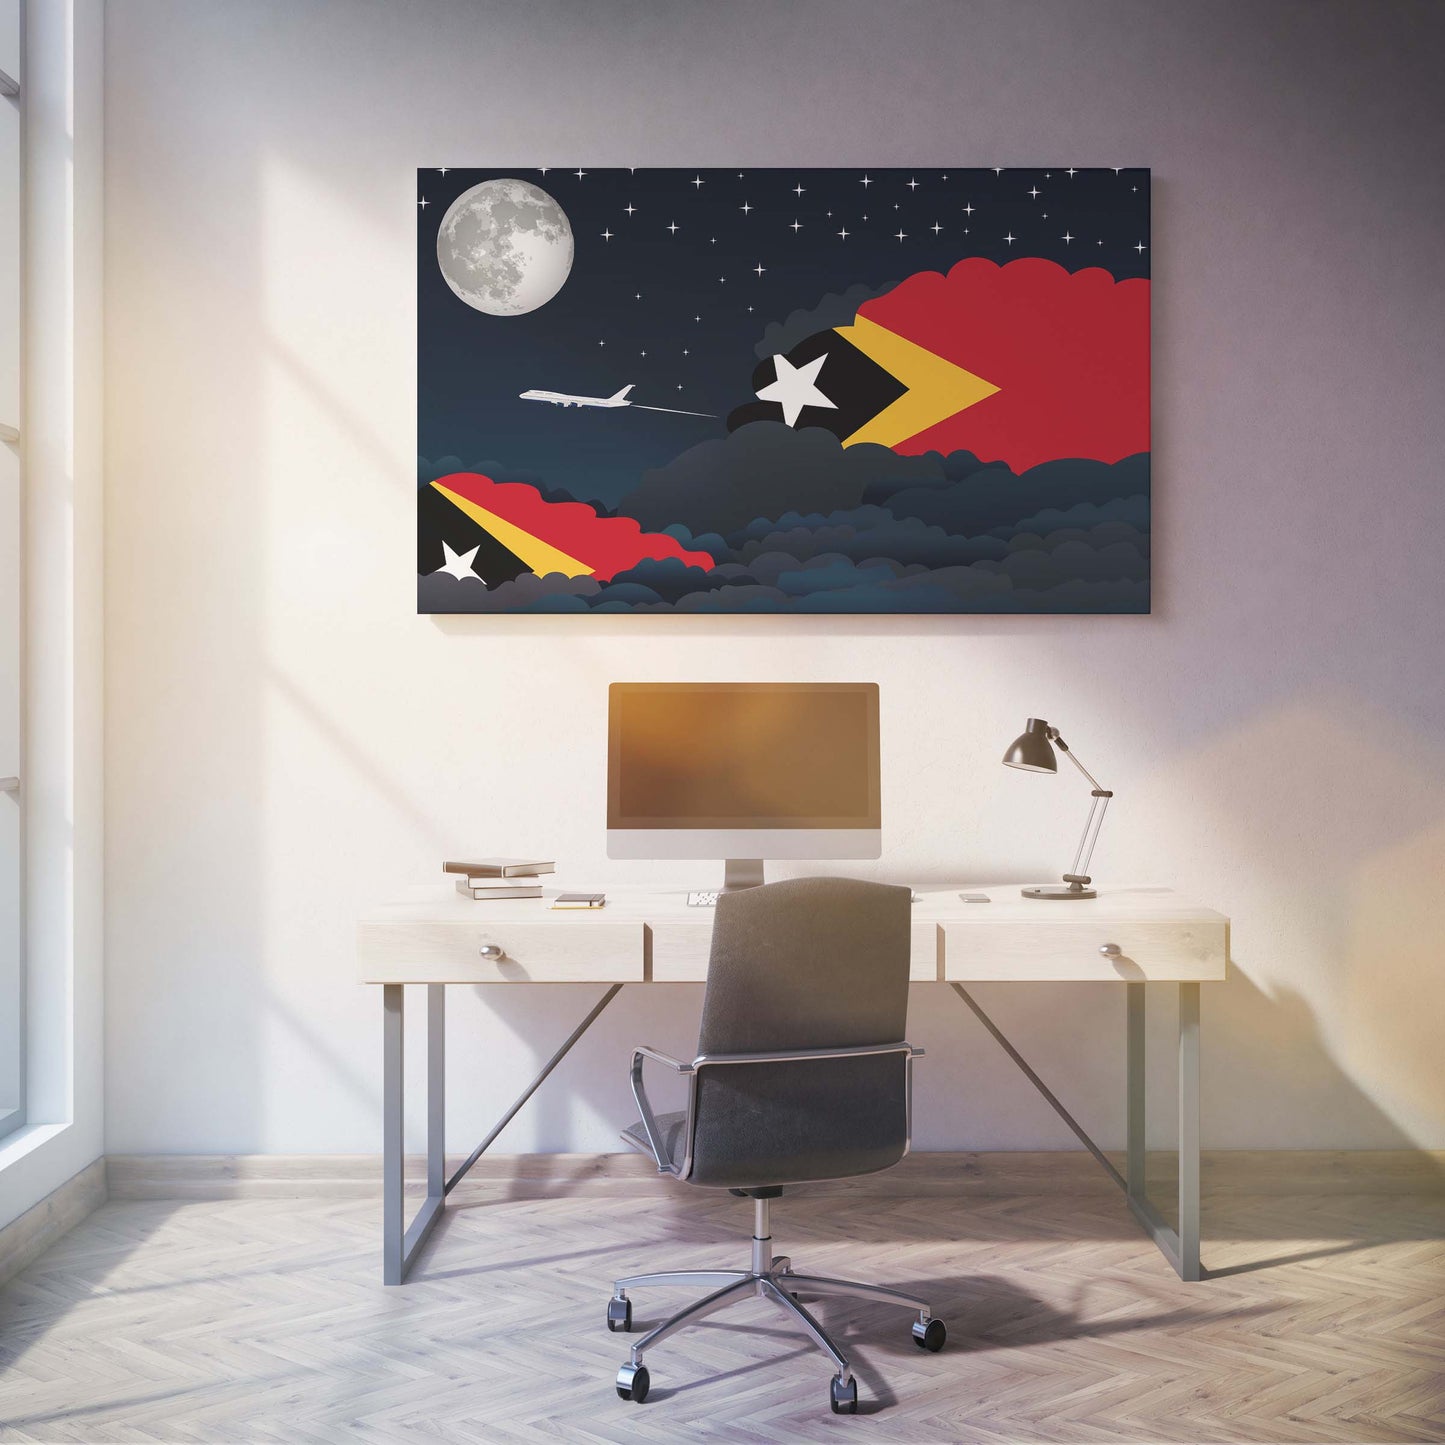 East Timor Flags Night Clouds Canvas Print Framed